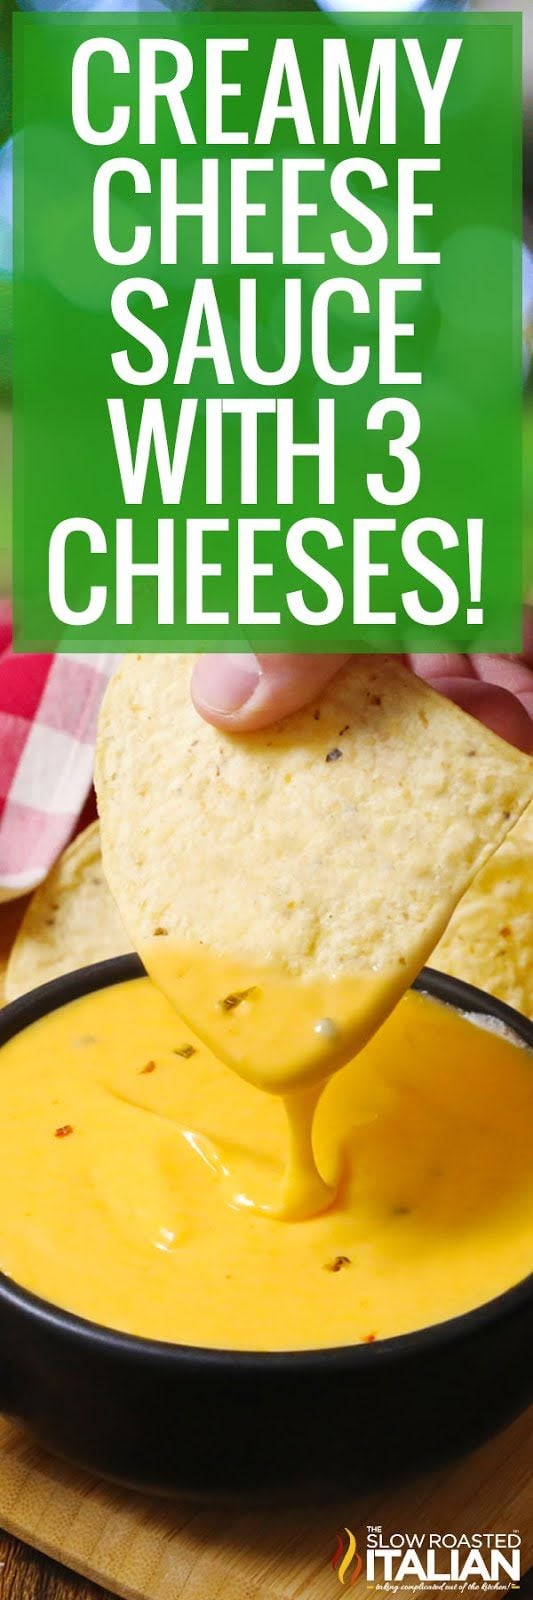 titled image (and shown): creamy cheese sauce recipe with 3 cheeses